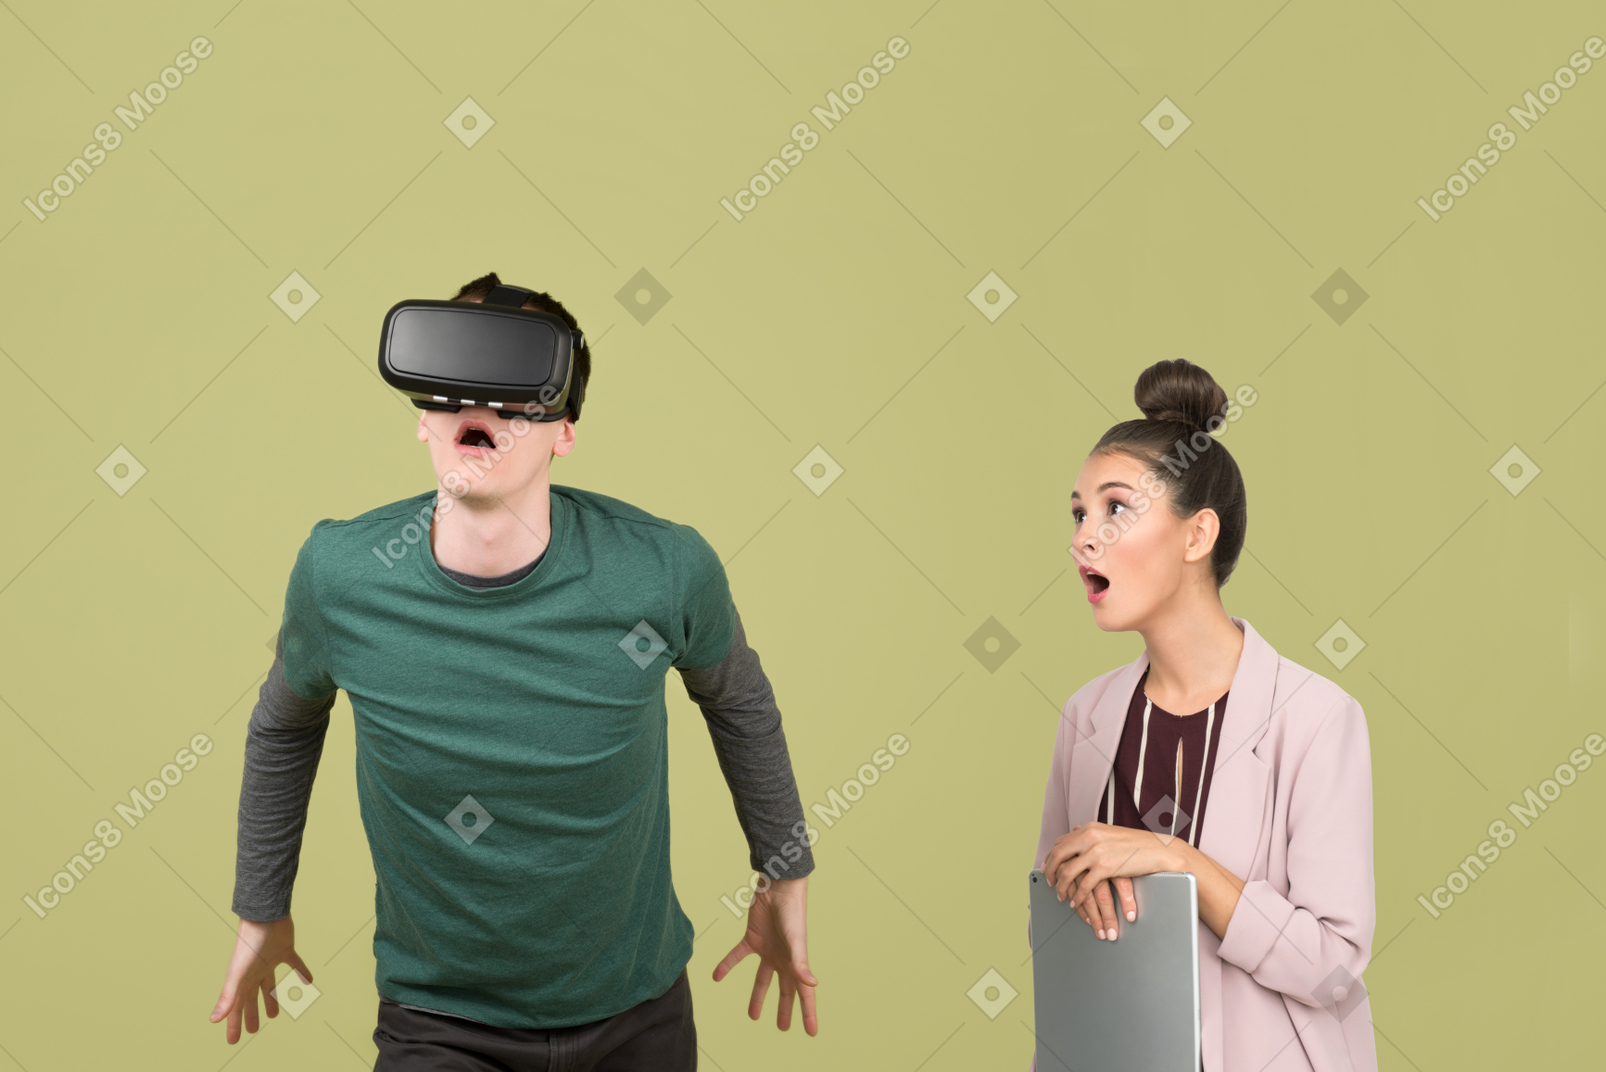 Surprised young woman looking at guy using vr glasses